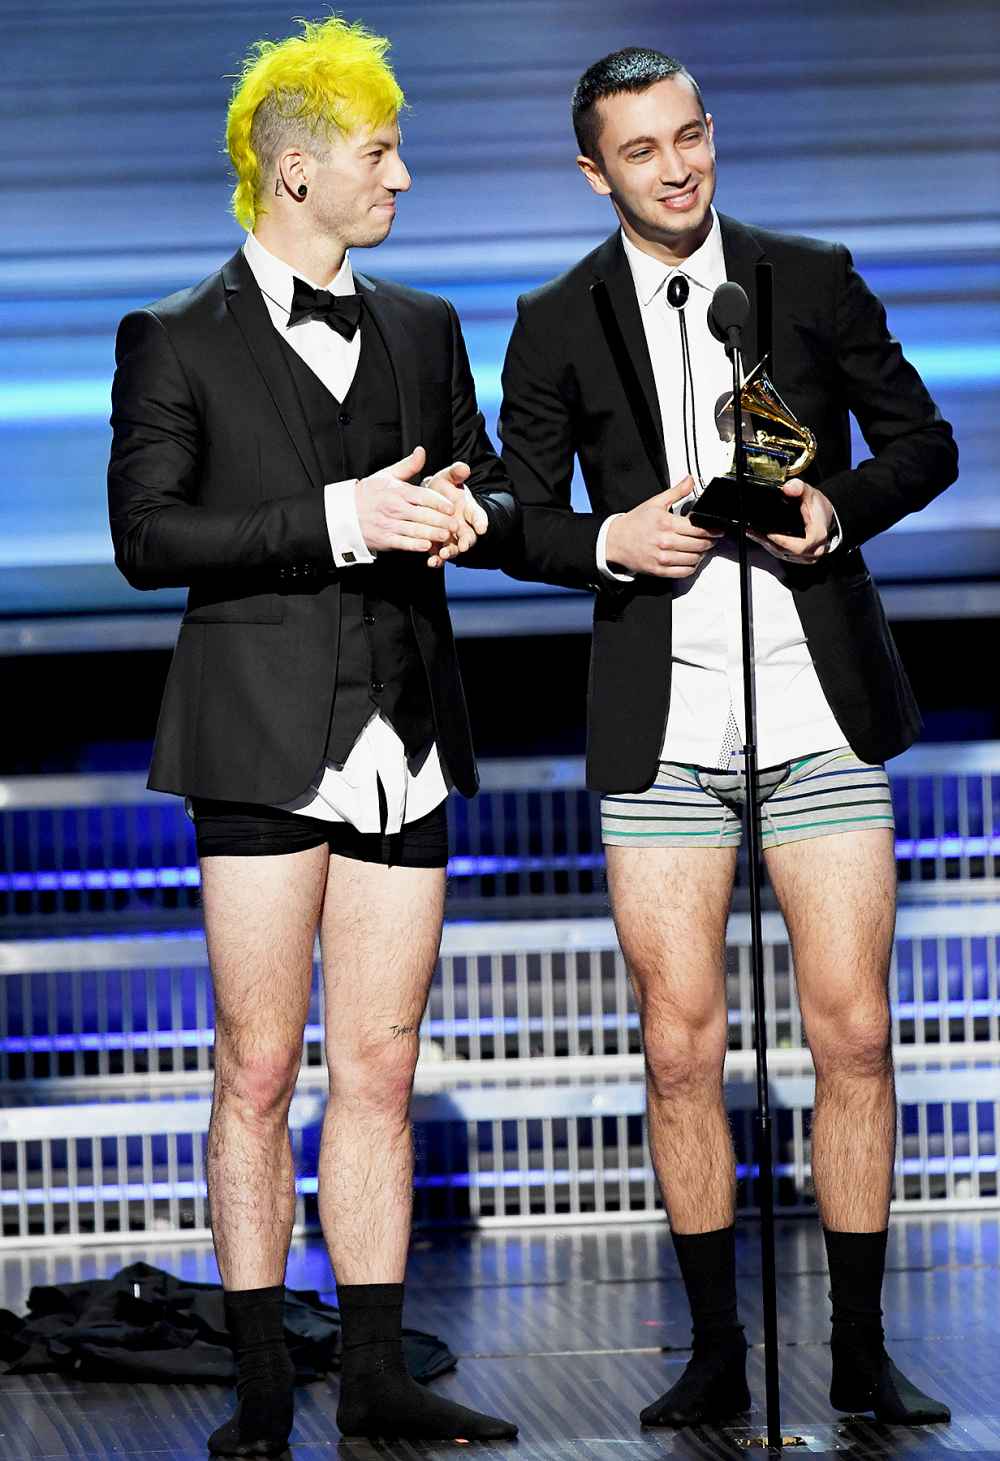 Josh Dun (L) and Tyler Joseph of music group Twenty One Pilots accept the Best Pop Duo/Group Performance award for 'Stressed Out' onstage during The 59th GRAMMY Awards at STAPLES Center on February 12, 2017 in Los Angeles, California.